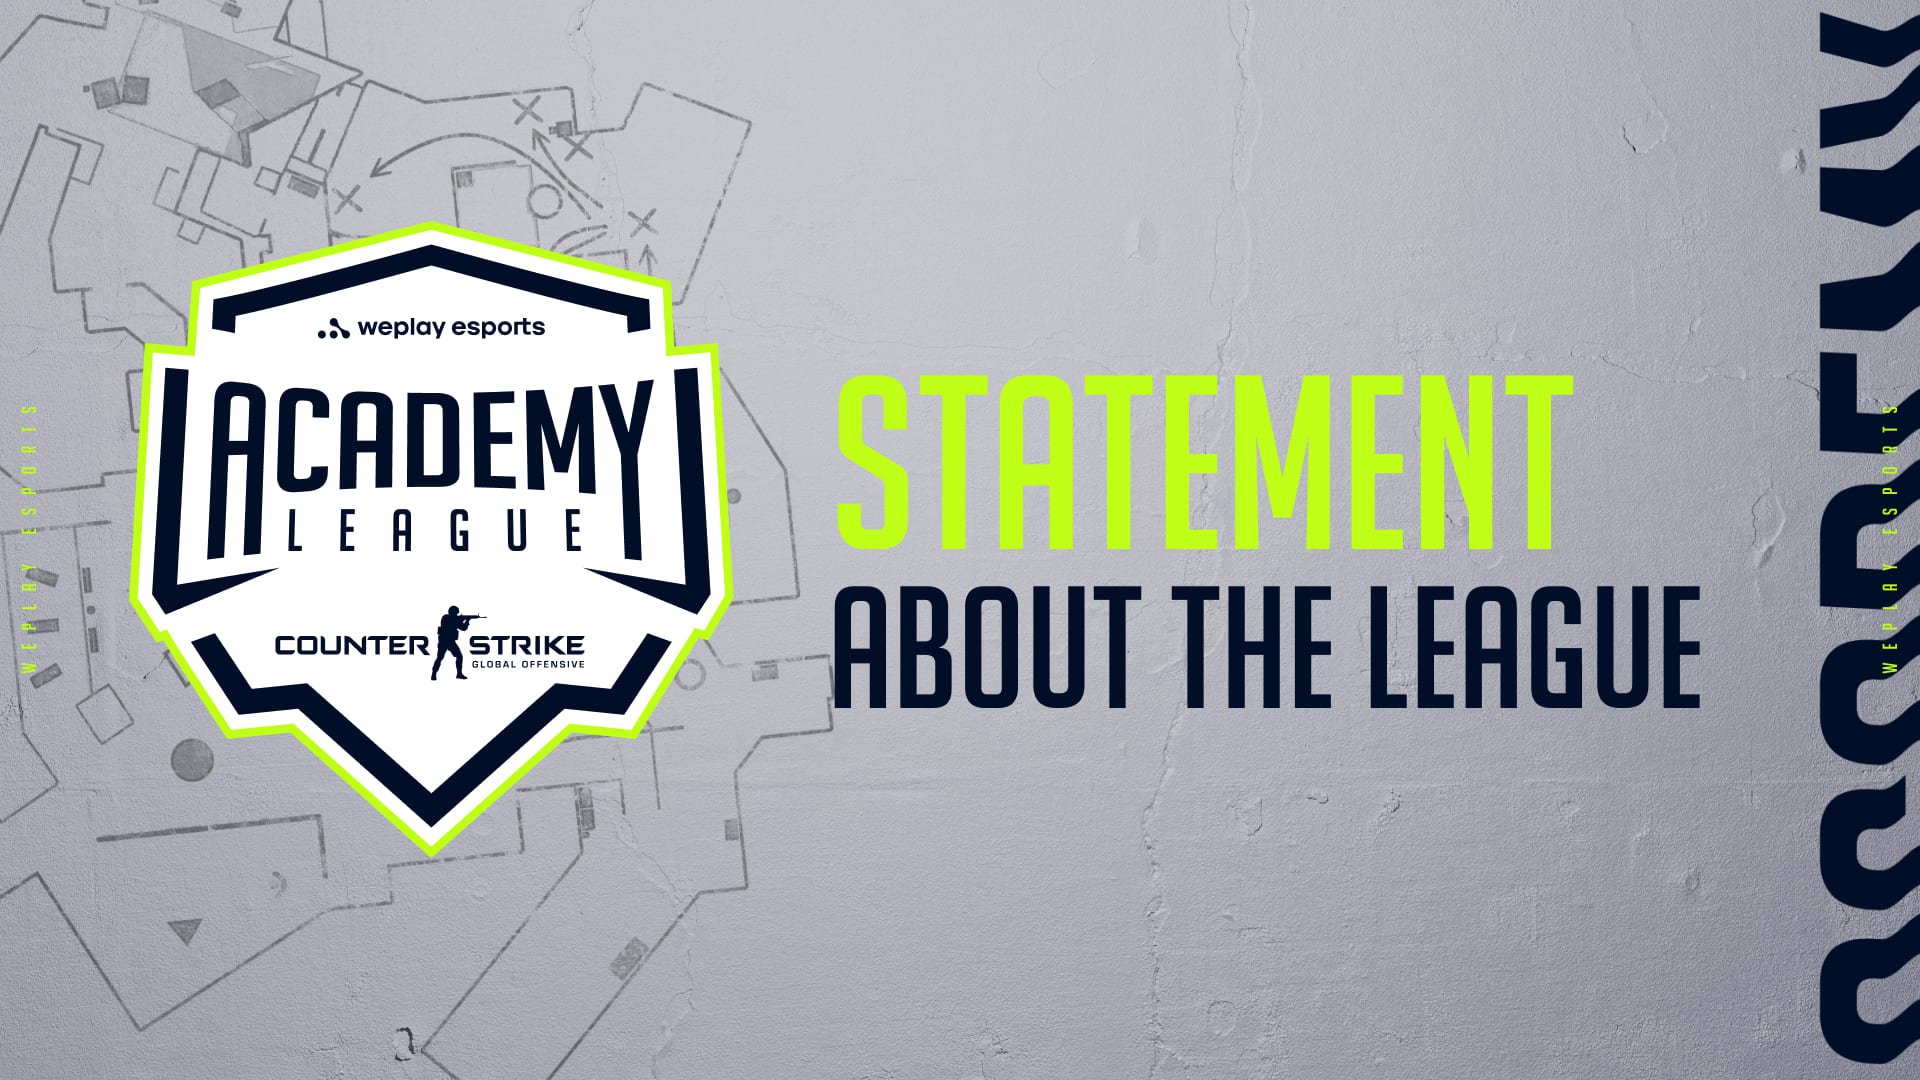 Statement regarding the participation of Outlaws in the WePlay Academy League Season 4